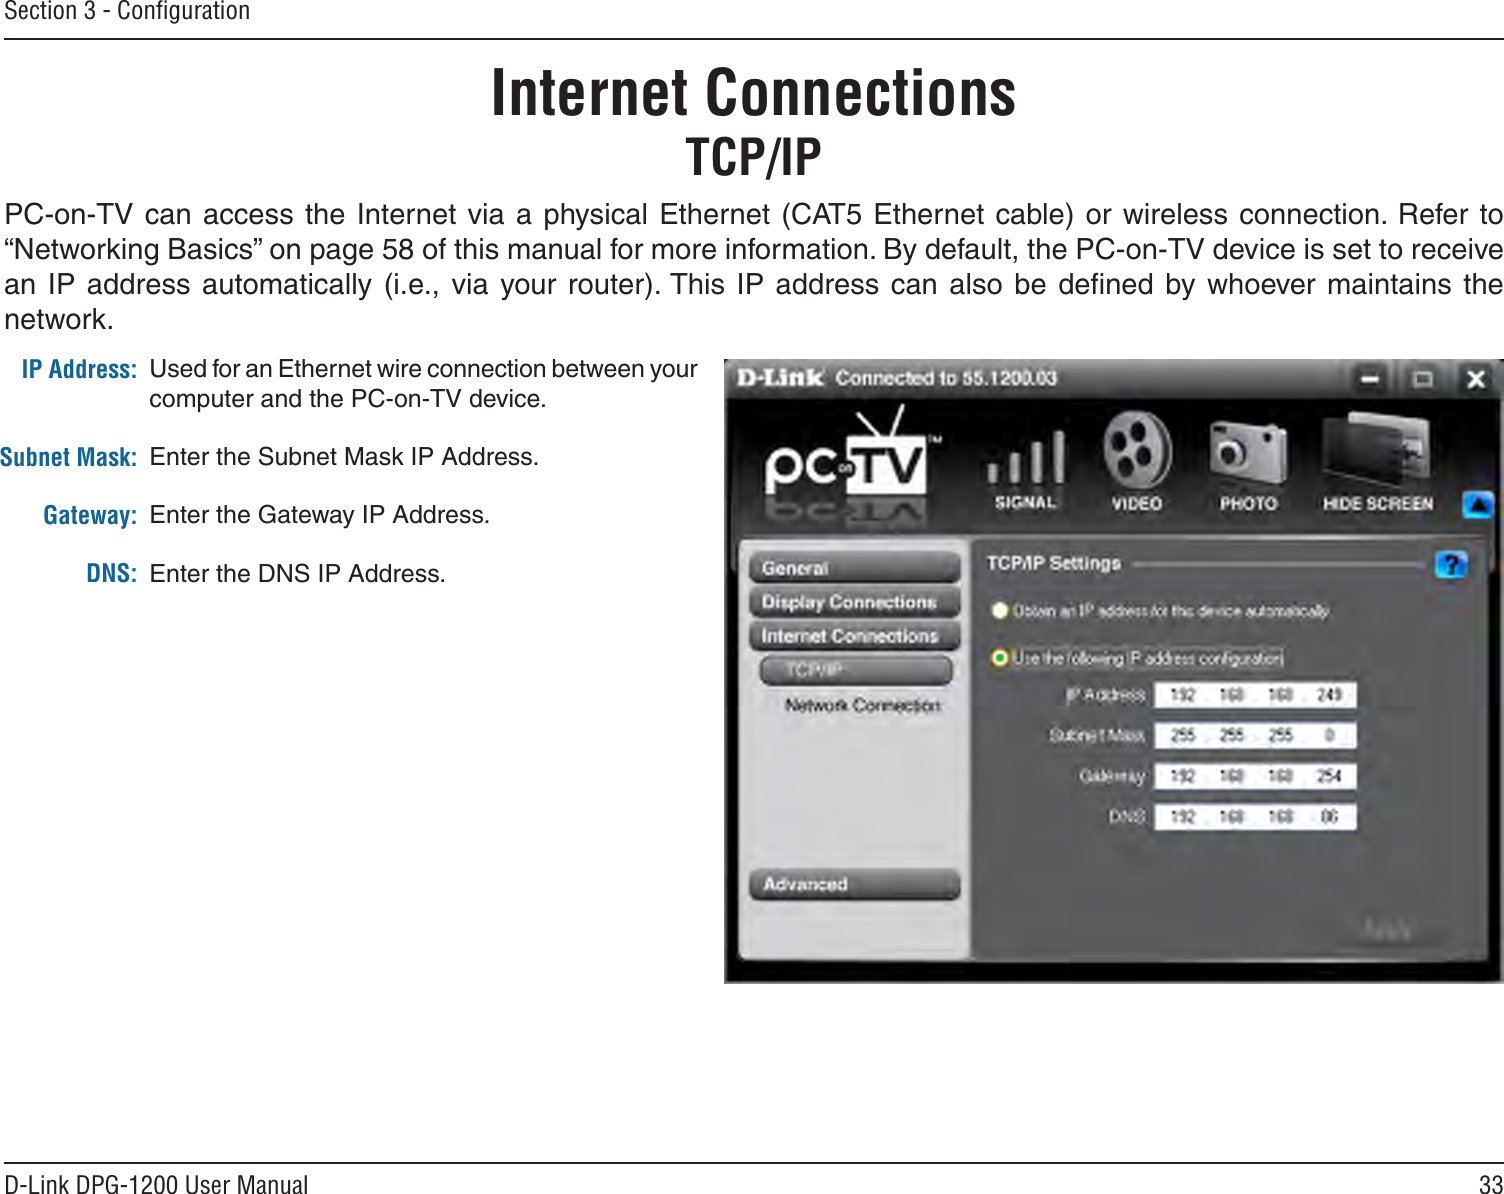 33D-Link DPG-1200 User ManualSection 3 - ConﬁgurationInternet ConnectionsTCP/IPPC-on-TV can  access the Internet via a physical Ethernet  (CAT5 Ethernet cable) or wireless connection. Refer to “Networking Basics” on page 58 of this manual for more information. By default, the PC-on-TV device is set to receive an IP address automatically (i.e., via  your router). This  IP  address  can  also  be  deﬁned  by whoever maintains  the network.IP Address:Subnet Mask:Gateway:DNS:Used for an Ethernet wire connection between your computer and the PC-on-TV device. Enter the Subnet Mask IP Address.Enter the Gateway IP Address.Enter the DNS IP Address.